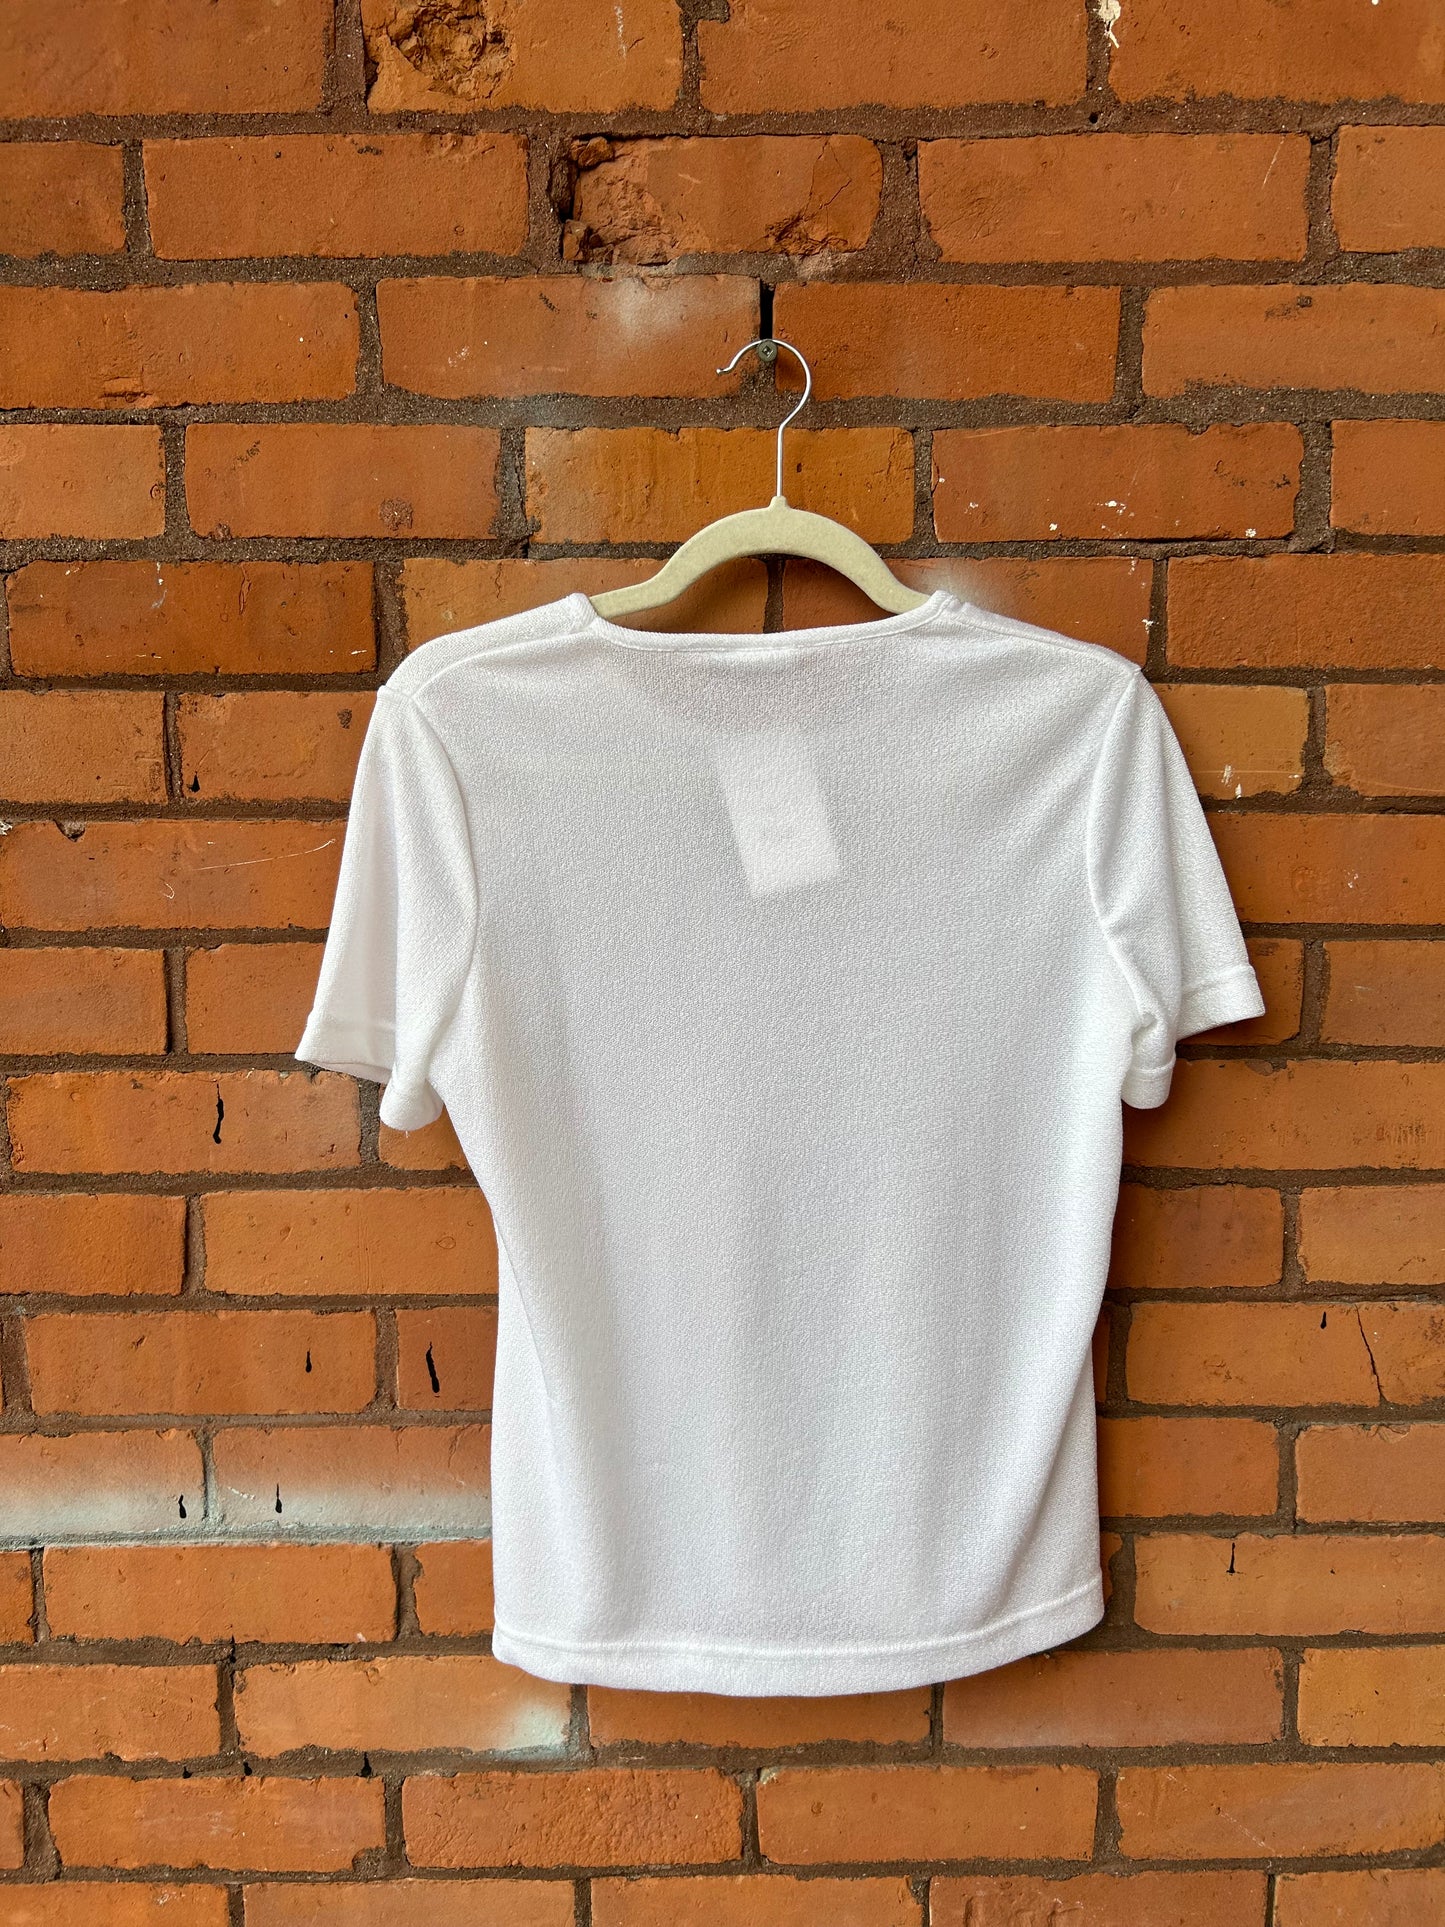 90’s Vintage White Sheer Tee / Size M-L